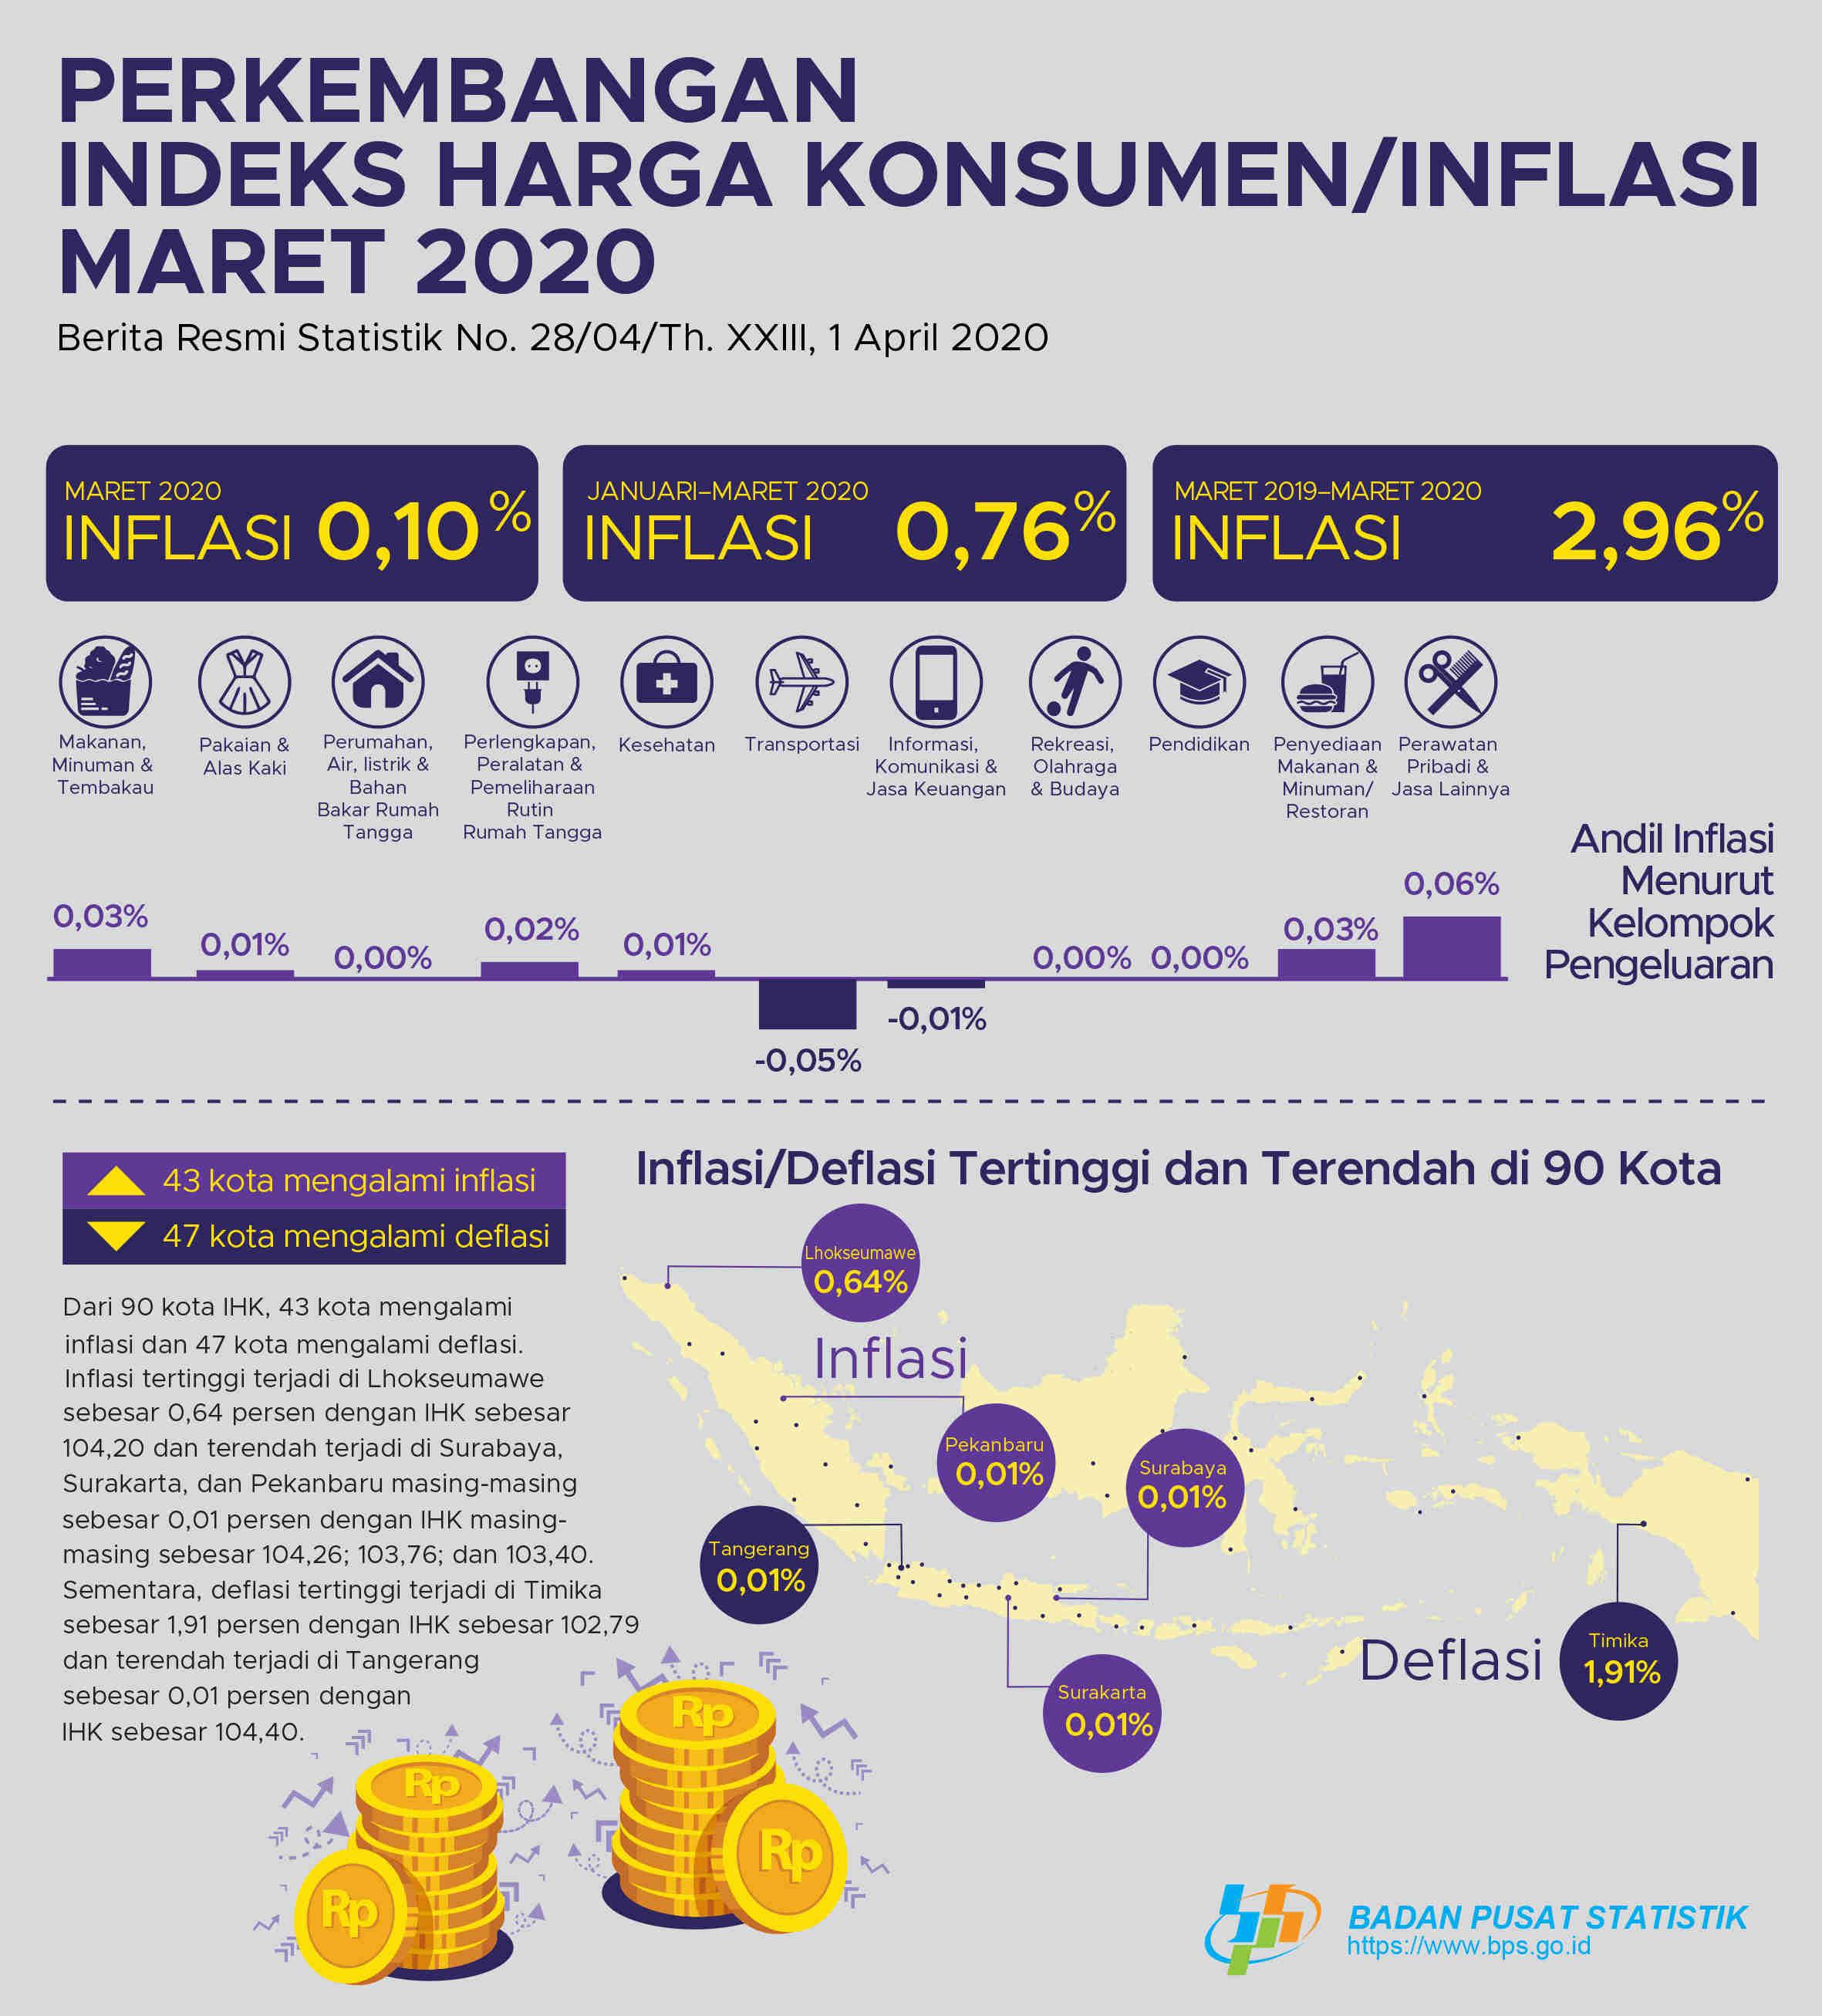 Inflation in March 2020 was 0.10 percent. The highest inflation occured in Lhokseumawe at 0.64 percent.